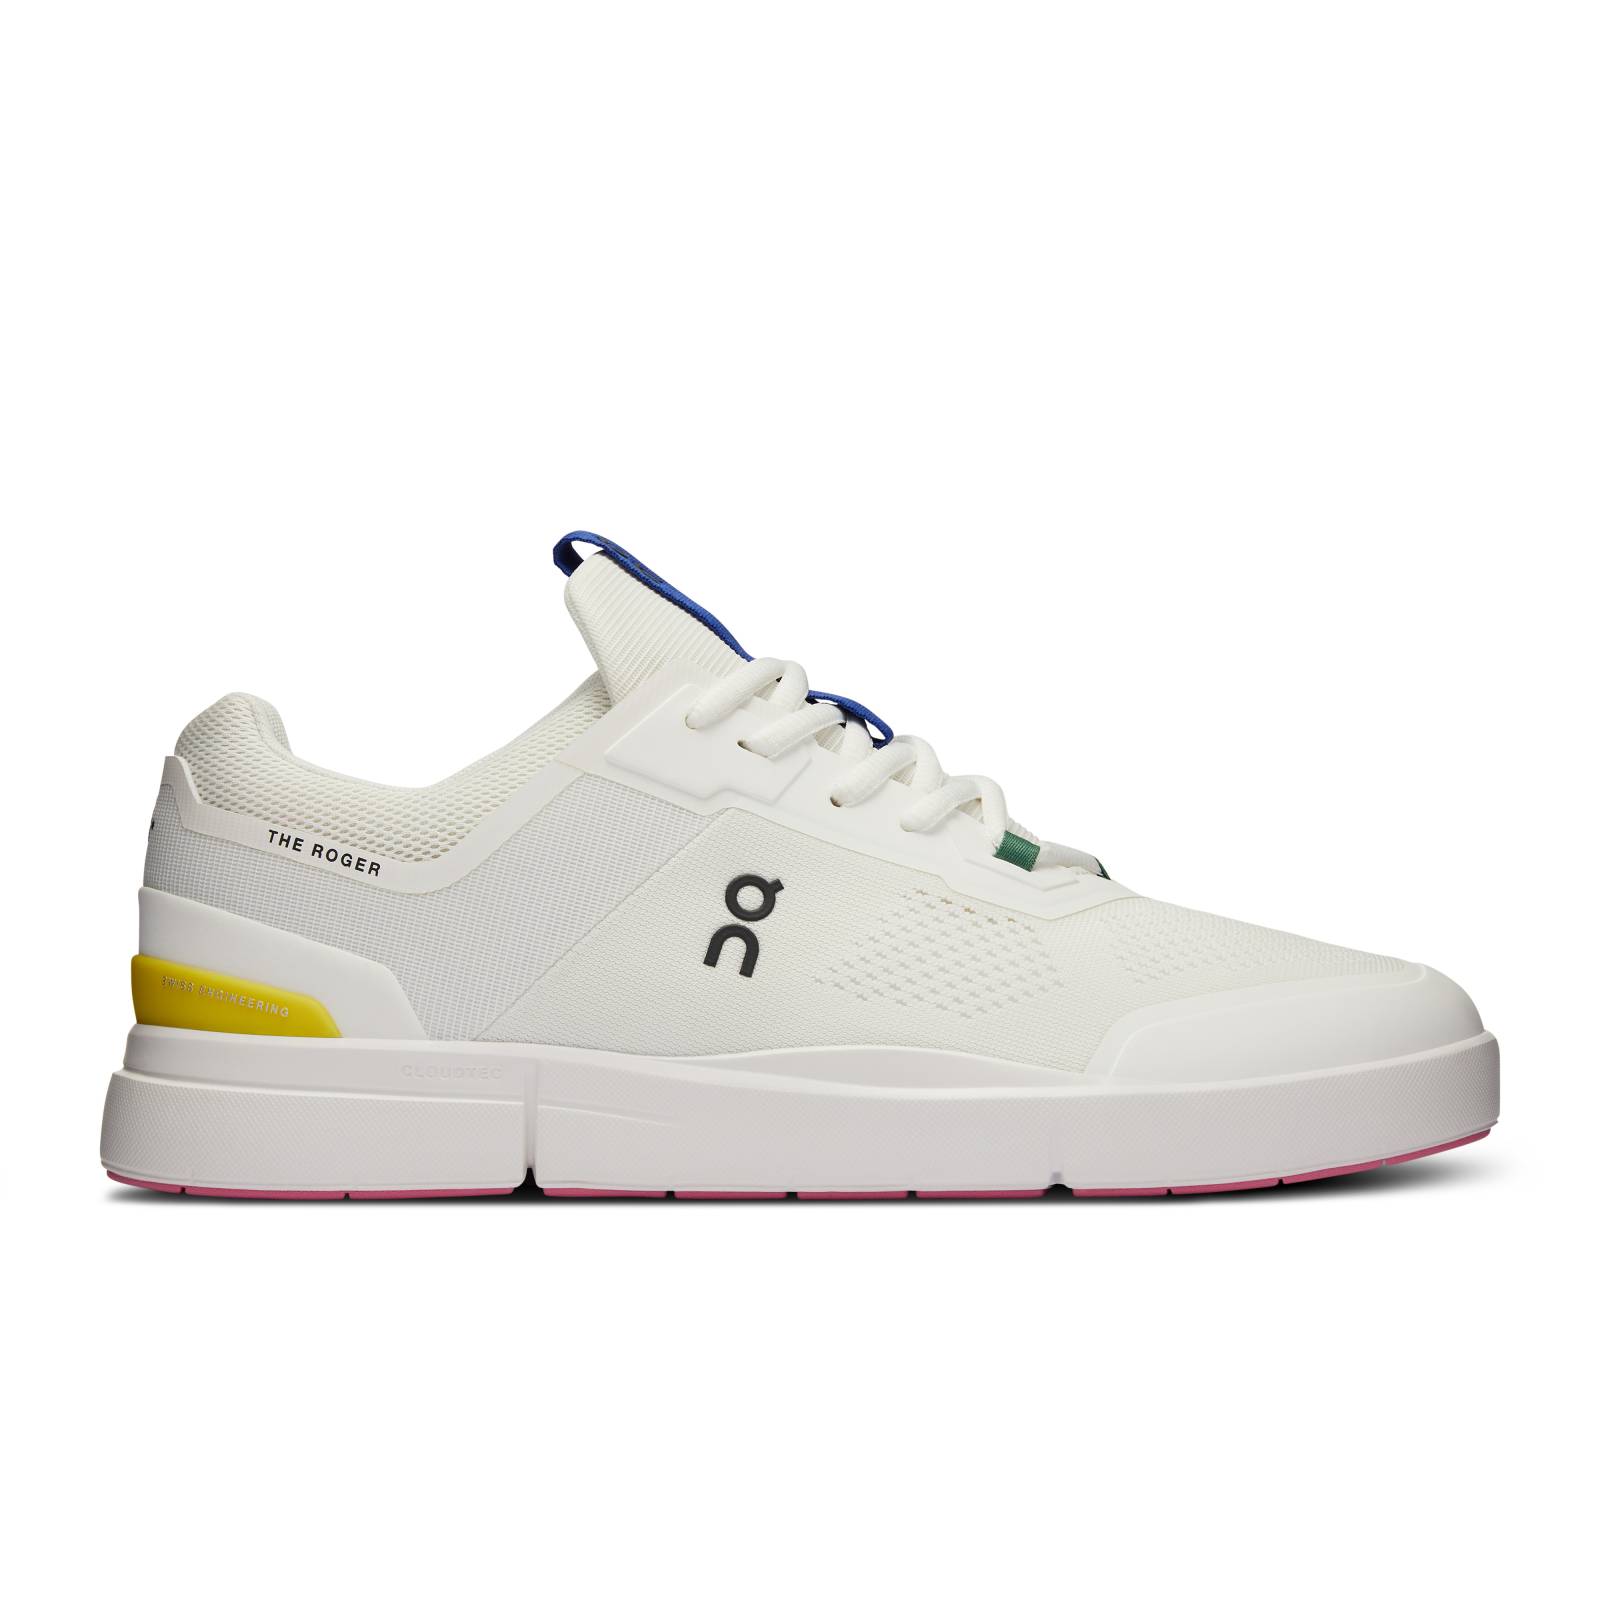 SCARPA ONRUNNING THE ROGER SPIN MEN'S Undyed-White yellow.jpg